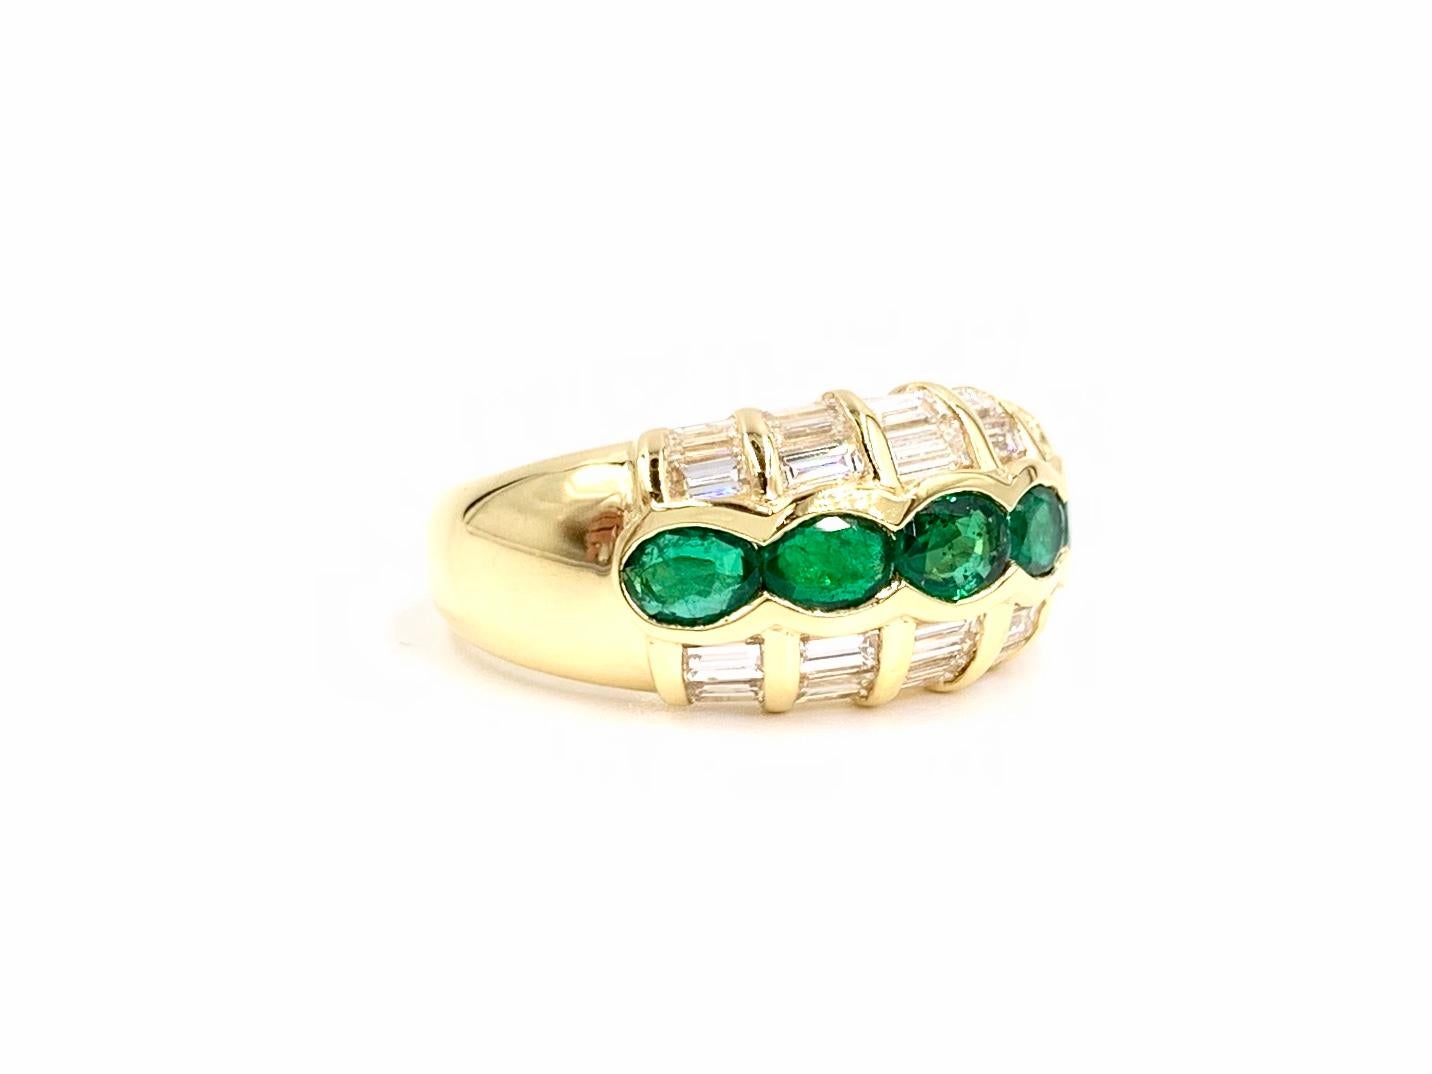 Made with superior craftsmanship, this modern and sleek low dome band style ring features 20 baguette diamonds at 1.10 carats total weight and 5 oval emeralds at 1.04 carats total weight. Emeralds have a very fine, rich green color - not too dark or